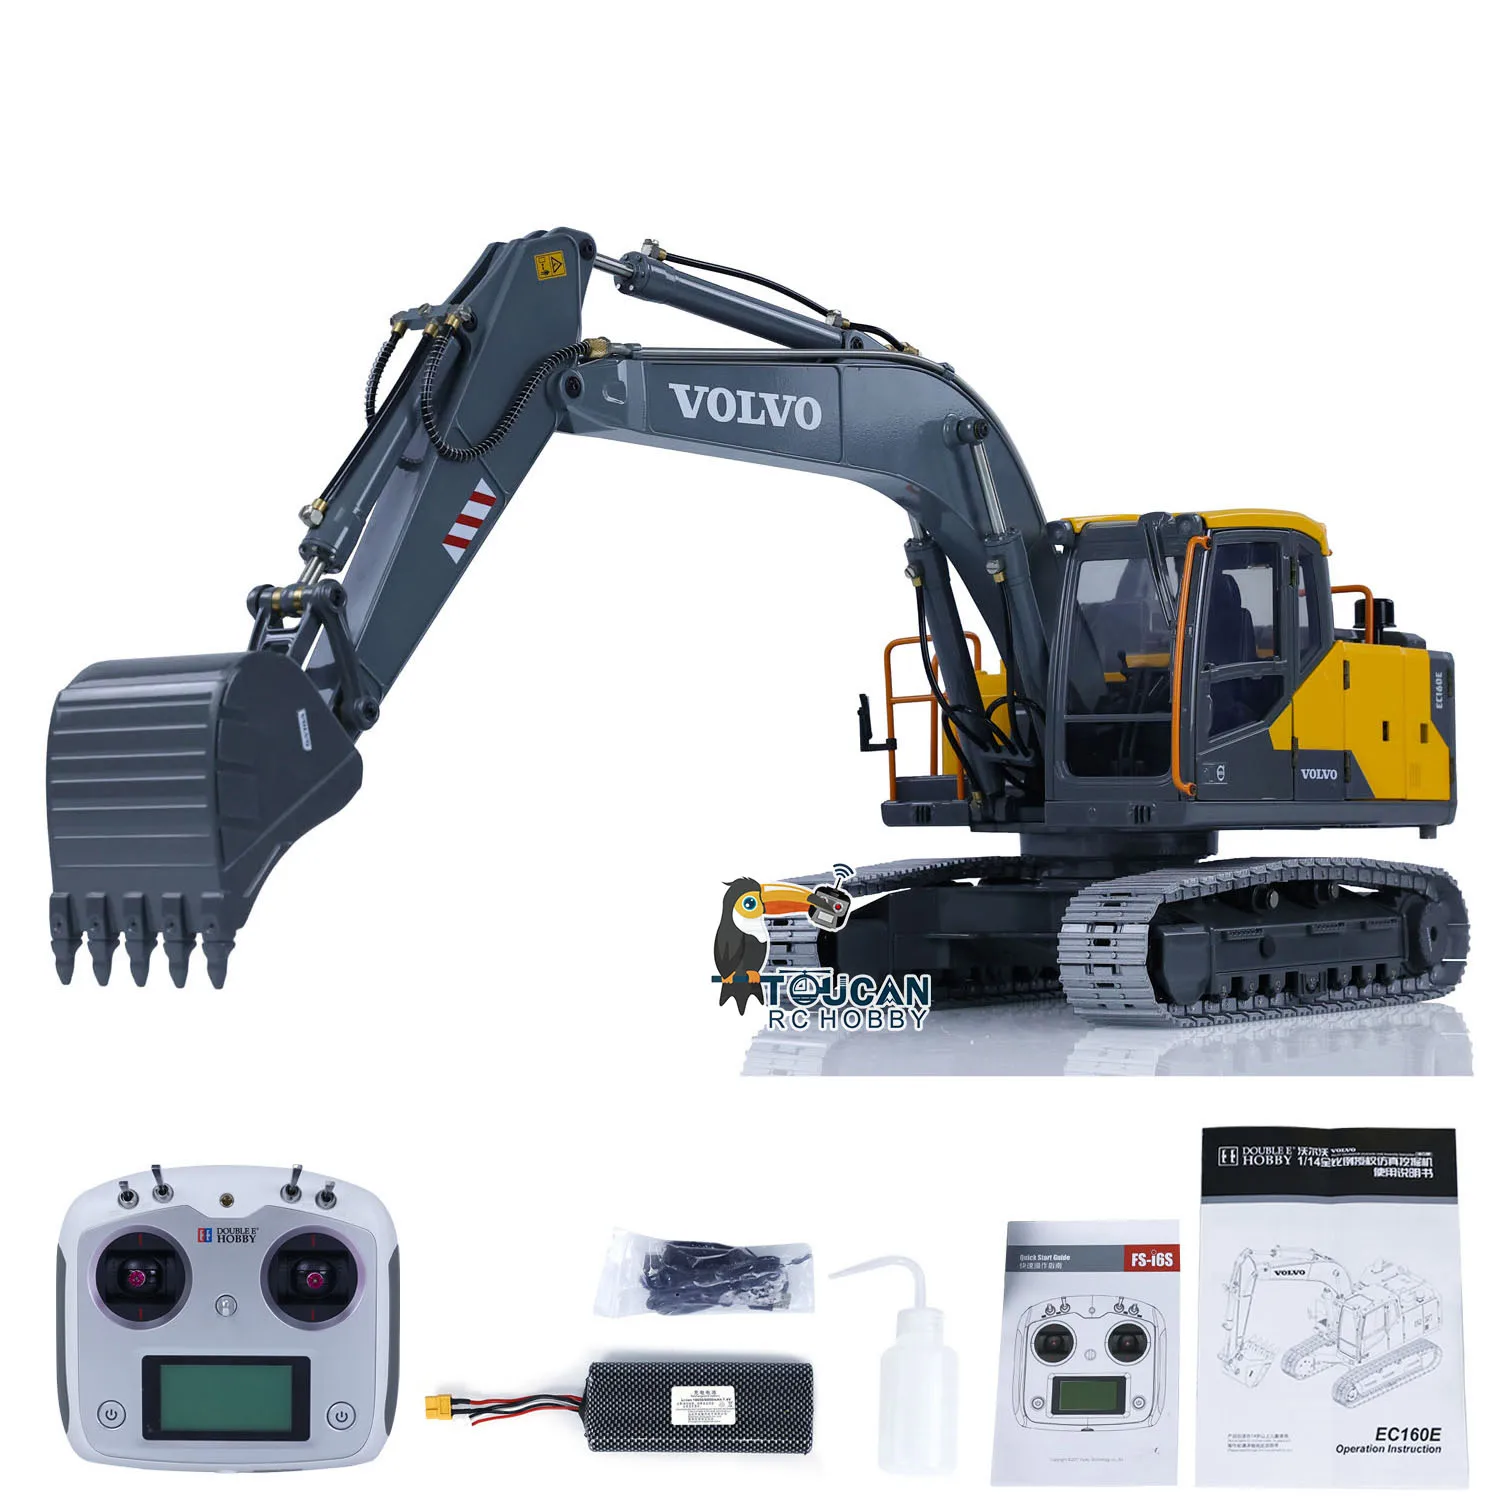 

Gifts Double E 1/14 Hydraulic RC Excavator EC160E E111 Alloy Remote Control Painted Finished Light Diggers Boys Toys TH23138